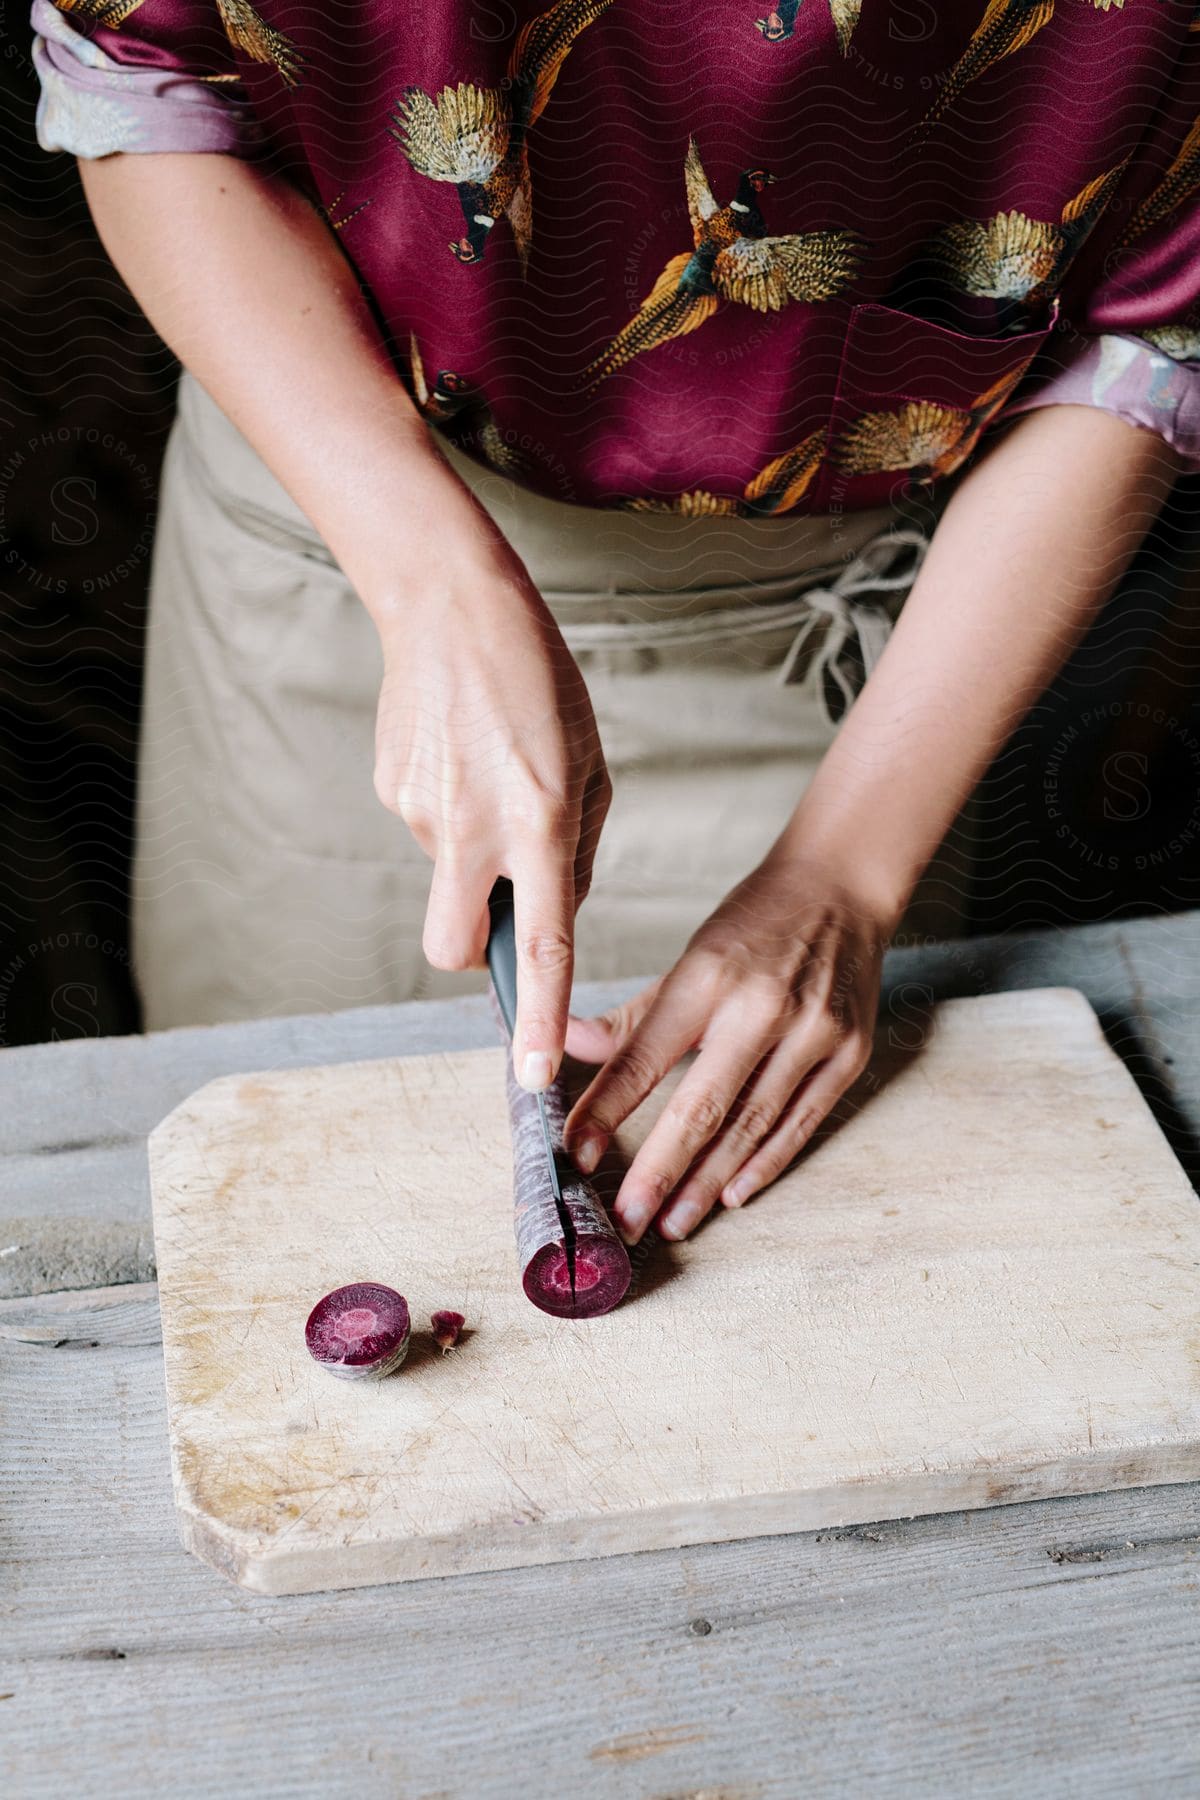 A chef slicing a purple carrot on a cutting board